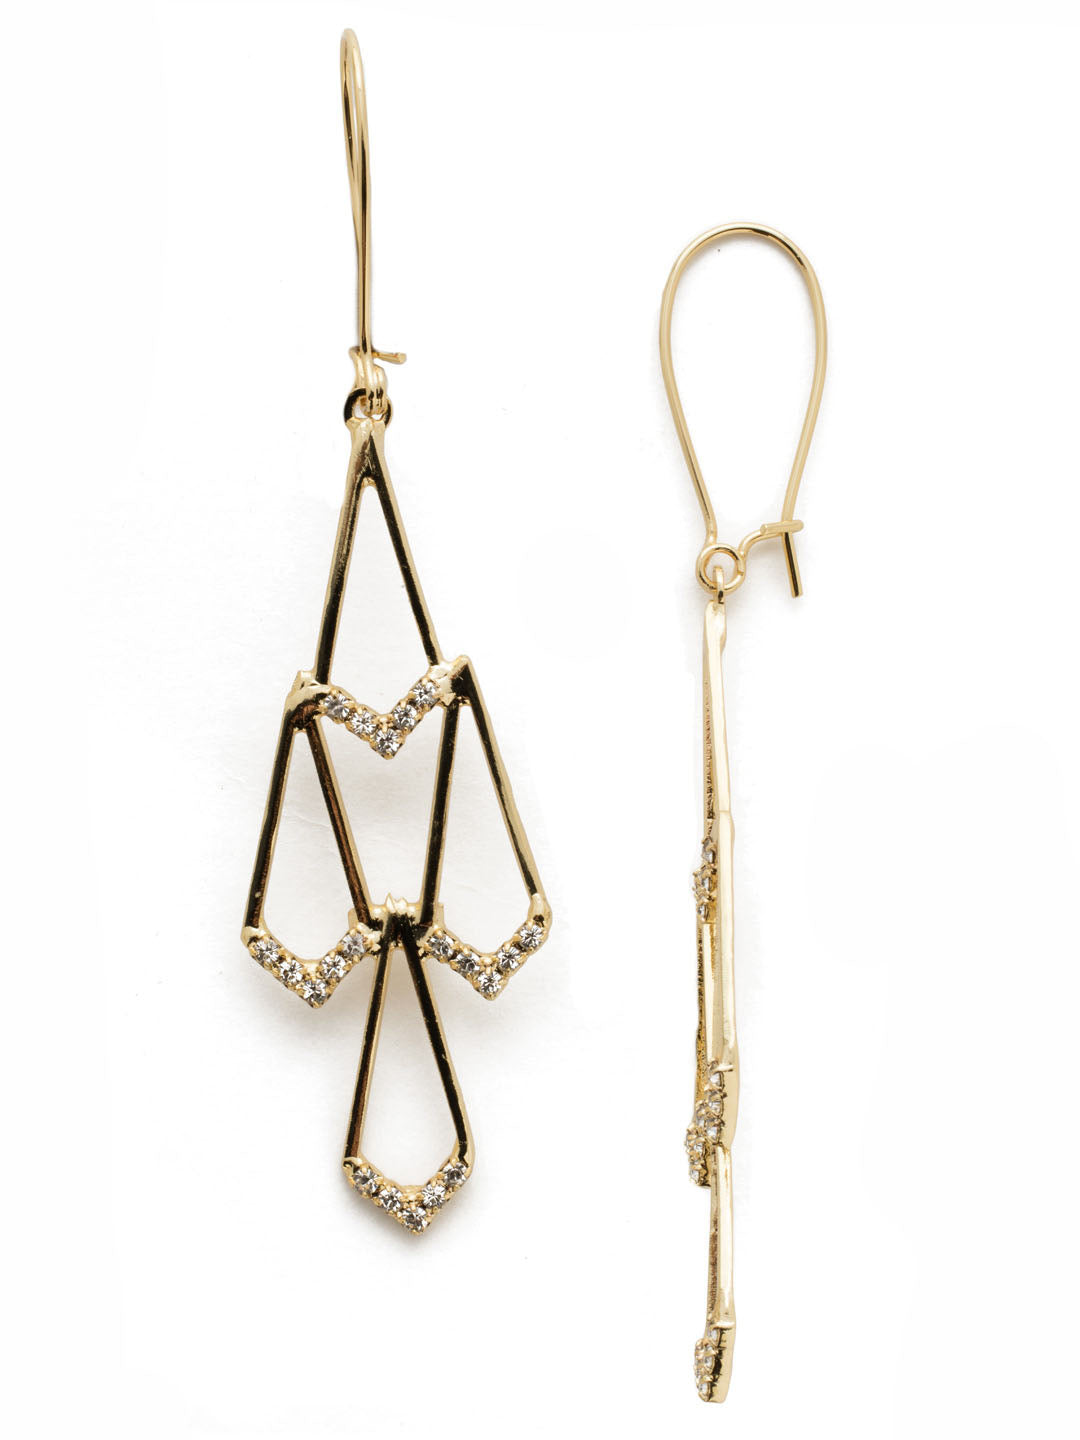 Hensley Crystal Dangle Earrings - 4EEK37BGCRY - <p>Dramatic and gorgous, these earrings are open, airy, sparkling with crystals, and just plain extraordinary. From Sorrelli's Crystal collection in our Bright Gold-tone finish.</p>